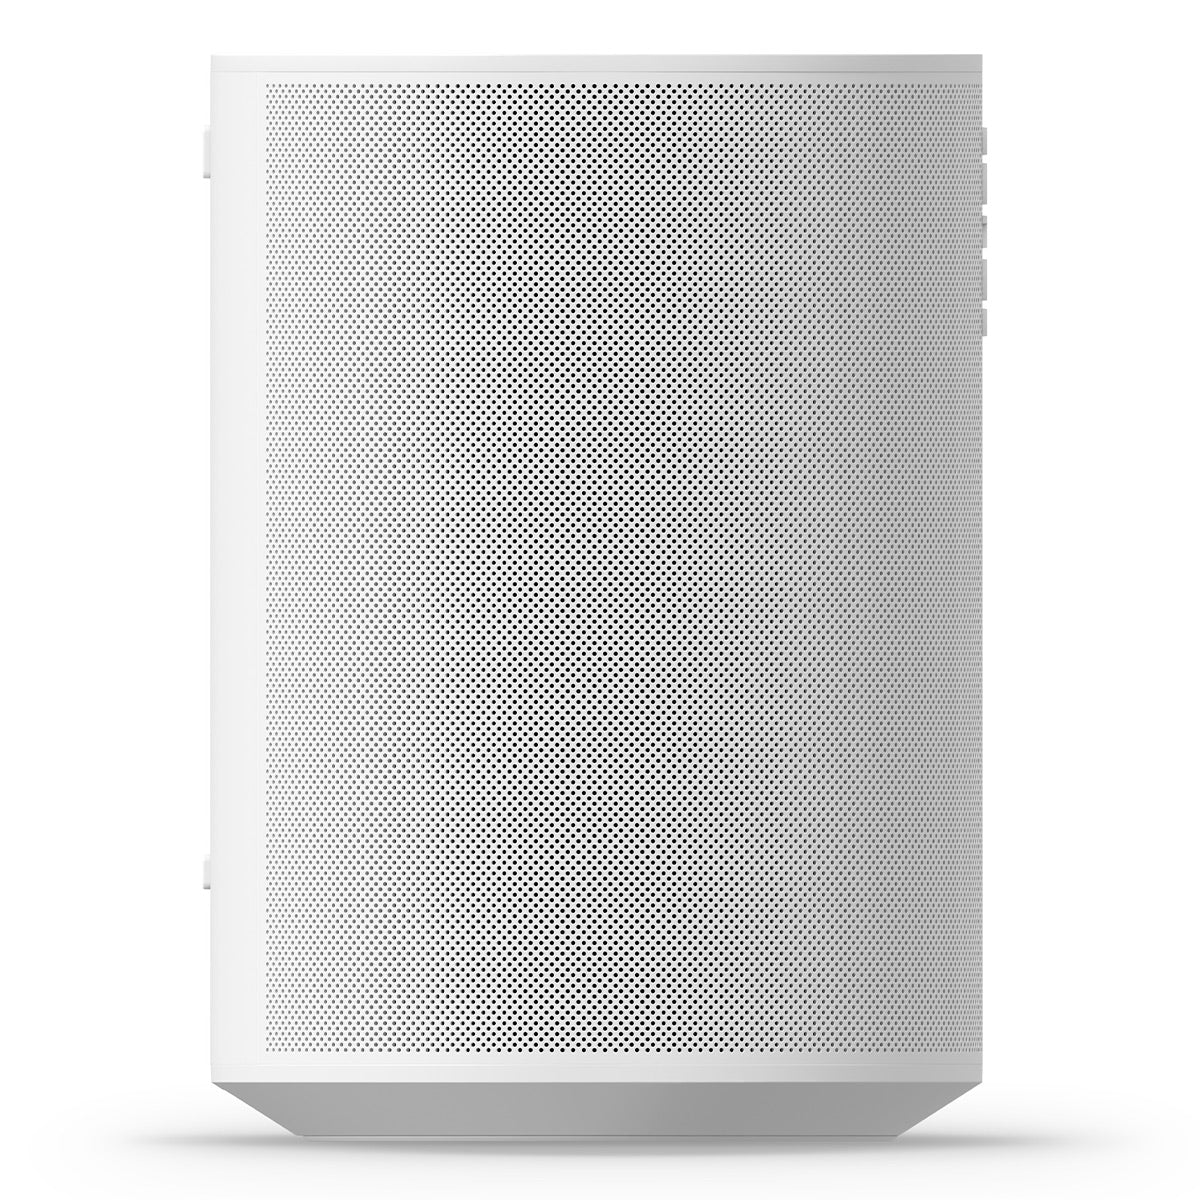 Sonos Era 300 Voice-Controlled Wireless Smart Speaker with Bluetooth,  Trueplay Acoustic Tuning Technology, & Alexa Built-In (White)